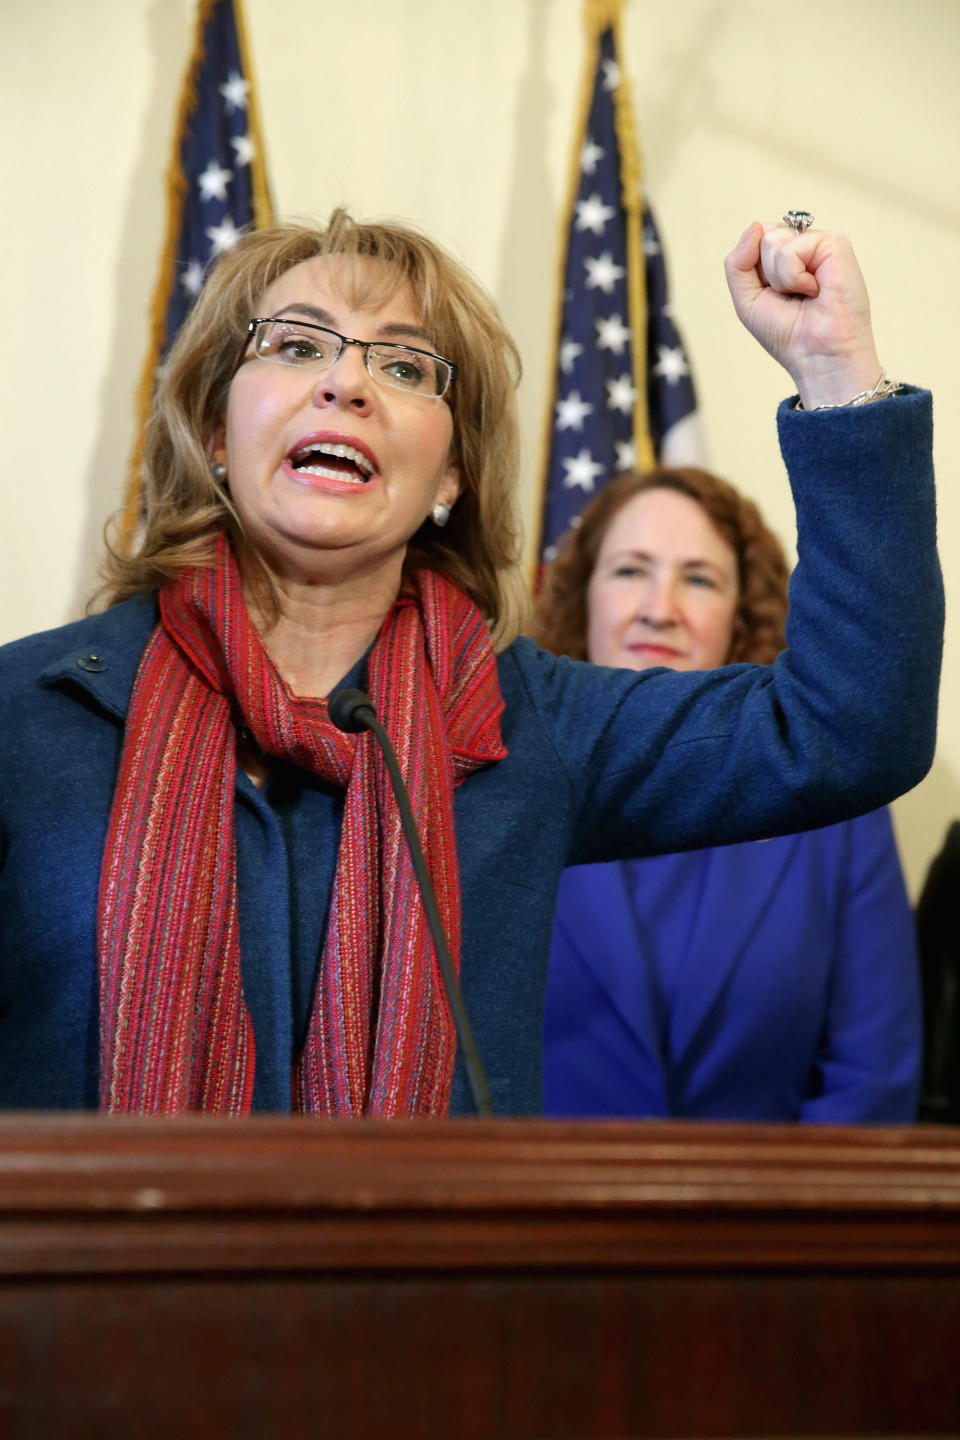 Former Congresswoman and handgun violence survivor Gabby Giffords (D-Ariz.) speaks during a news conference about background checks for gun purchases at the Canon House Office Building on Capitol Hill on March 4, 2015.